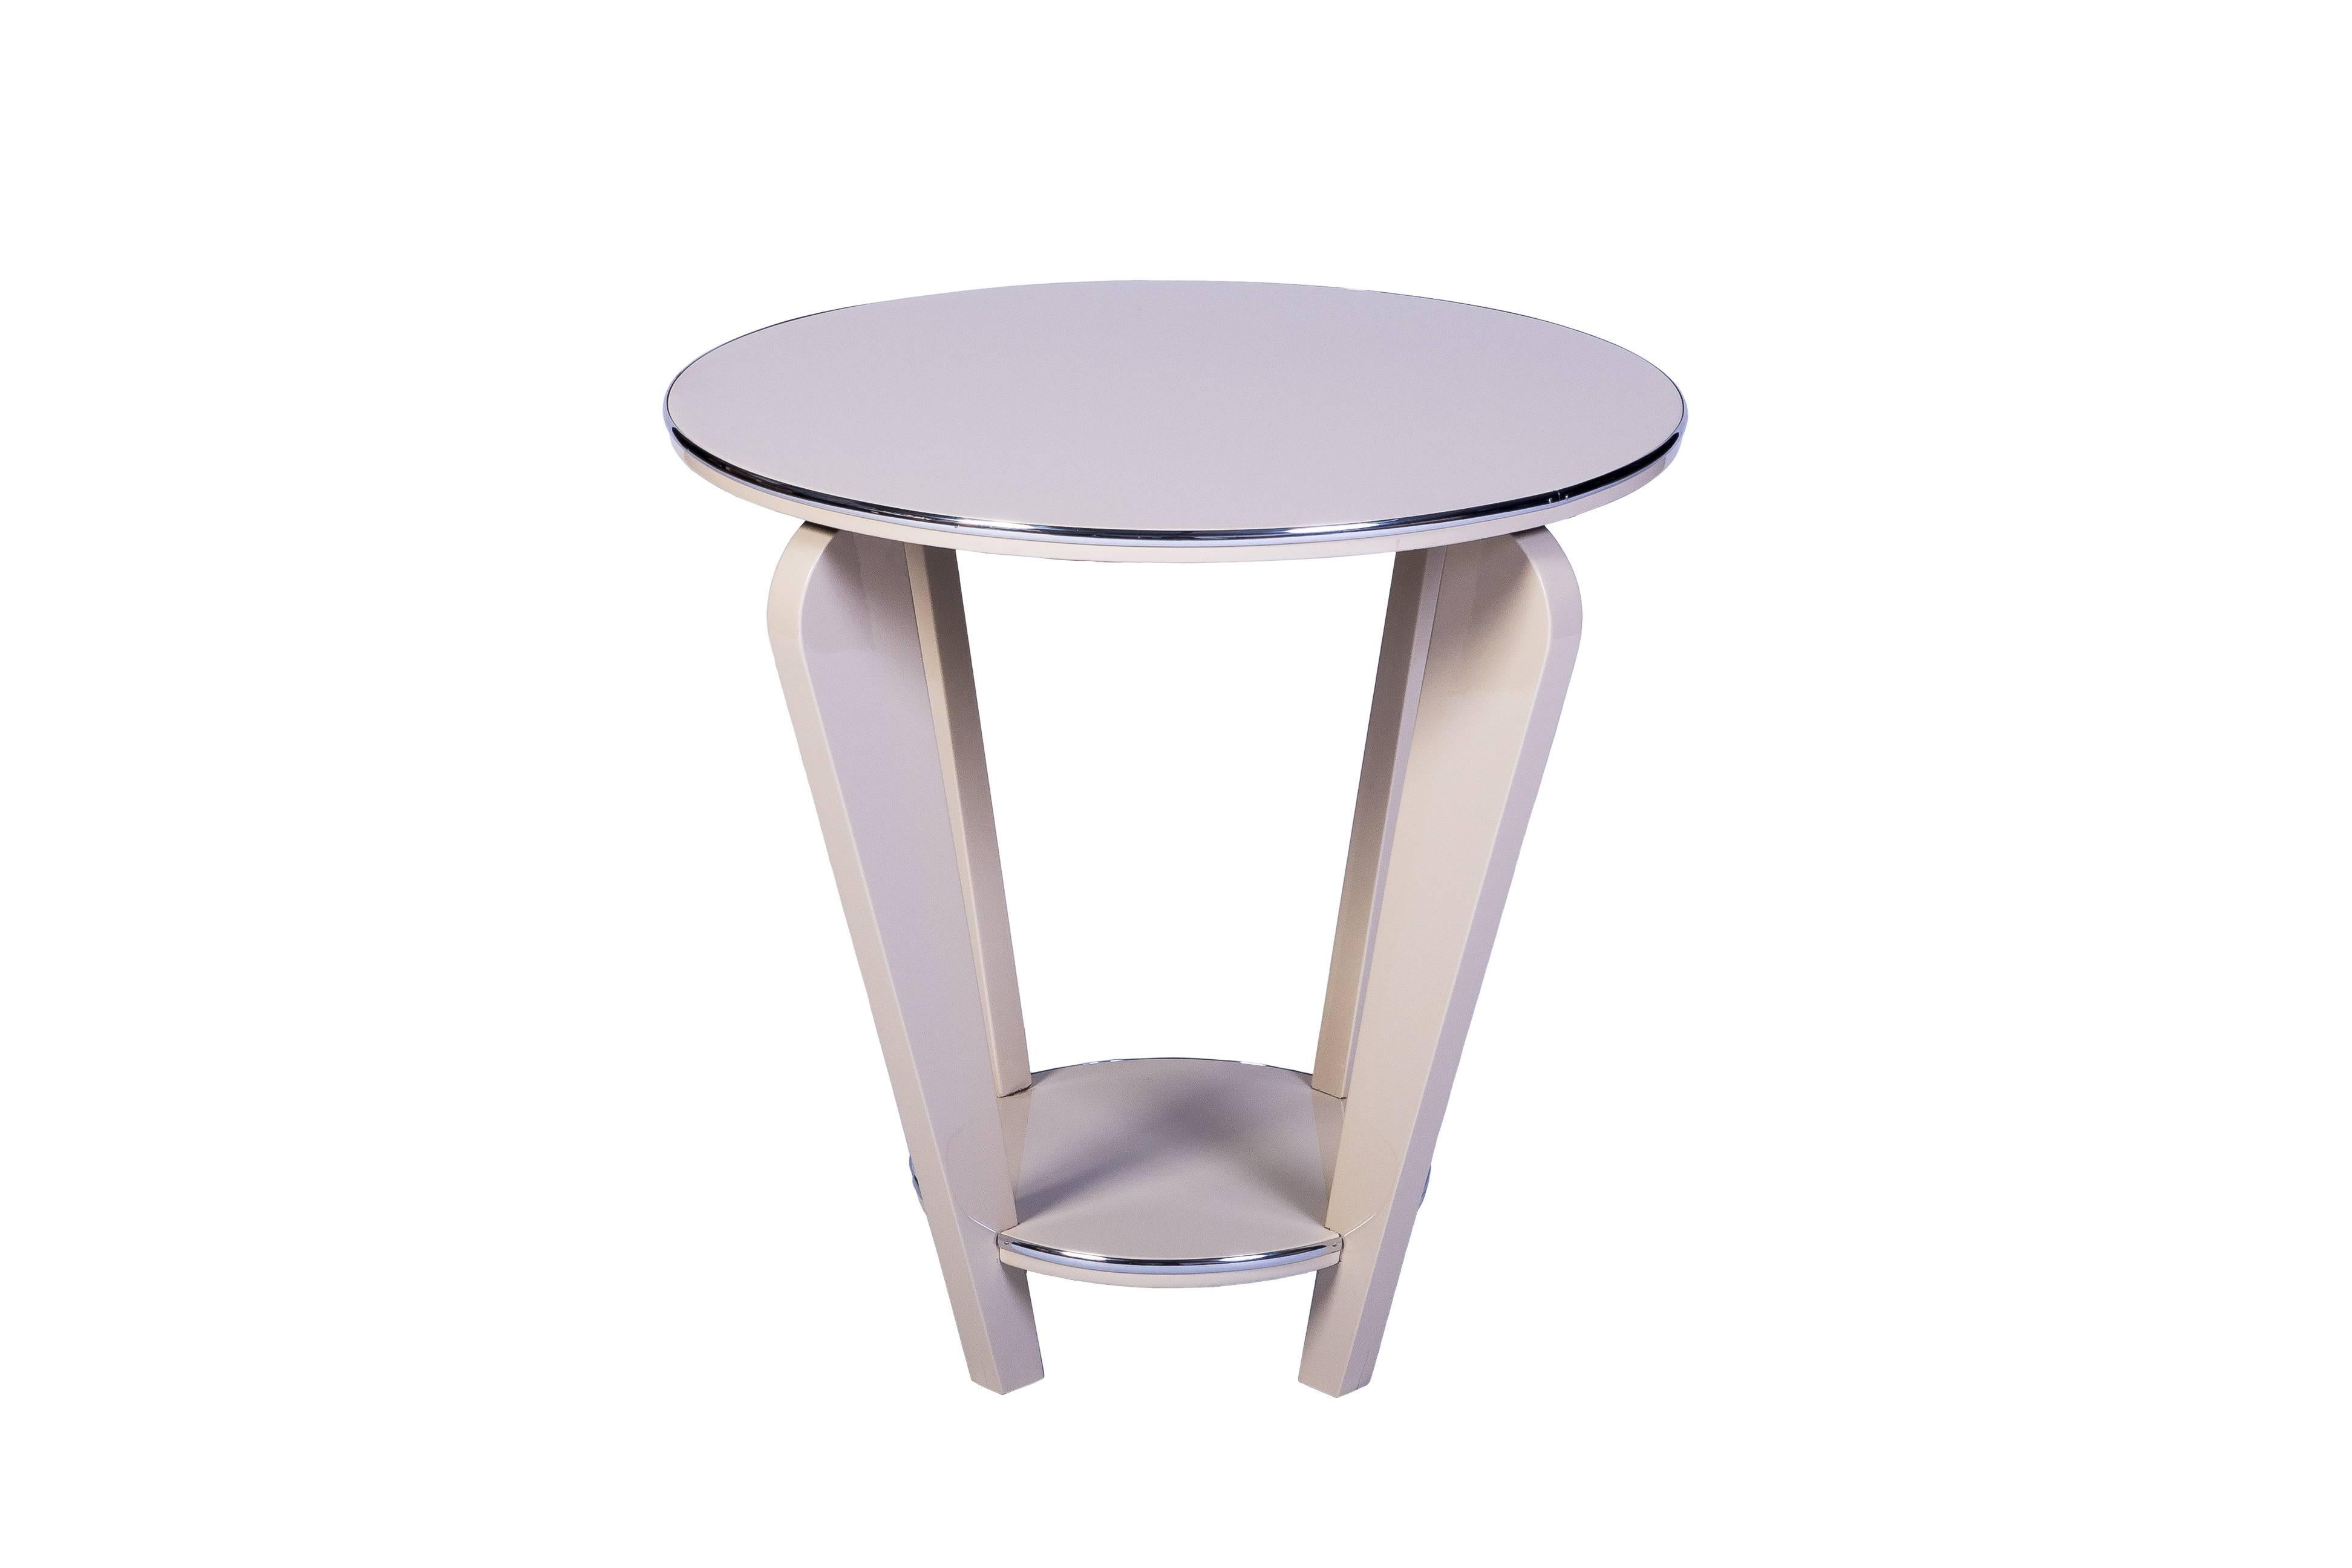 This beautiful Art Deco end or side table features a conical design with curved legs, chrome detailing and a beautiful high gloss white lacquer finish.